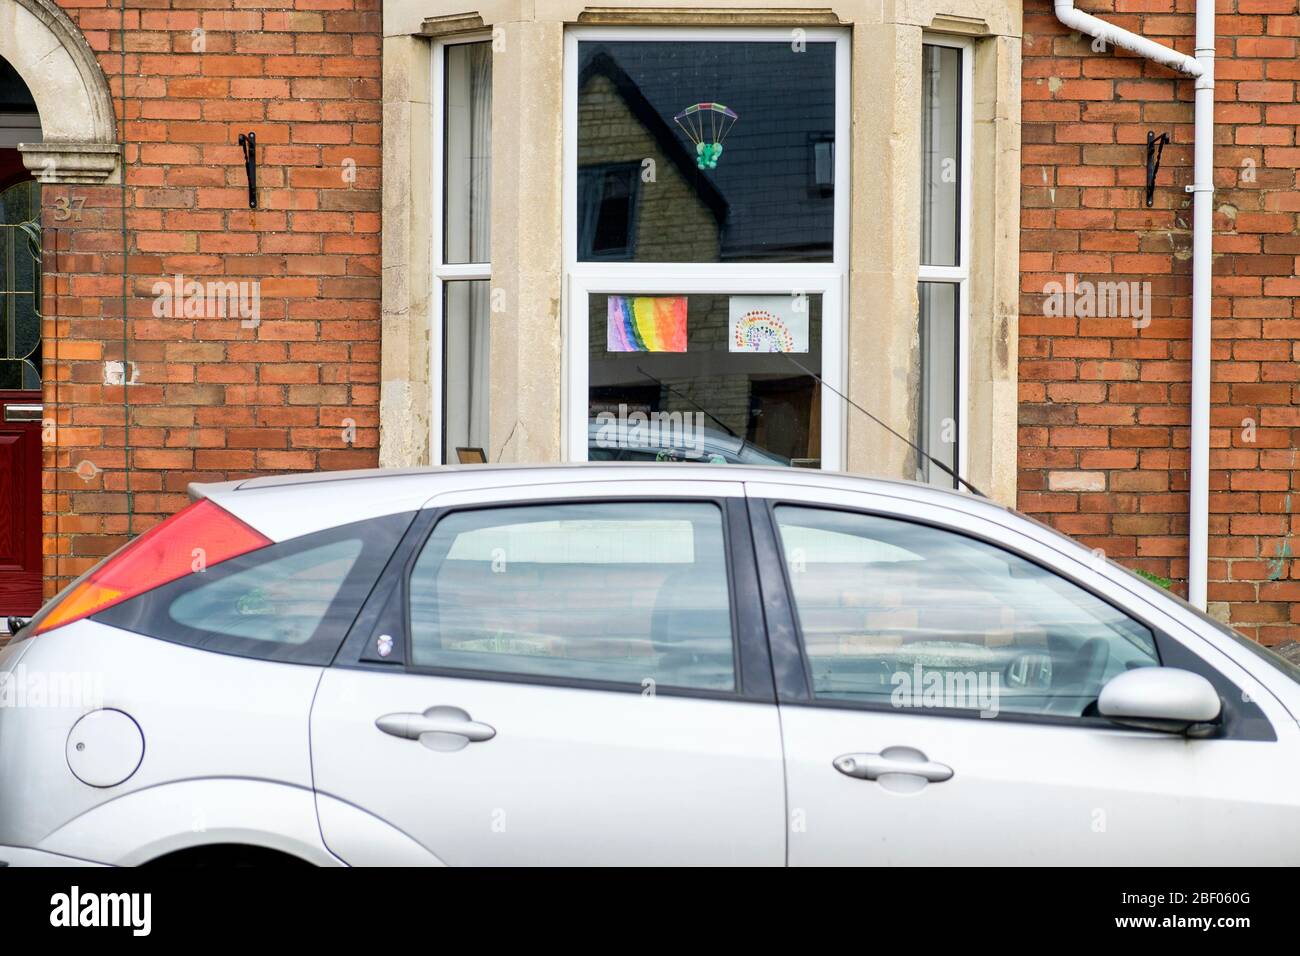 Chippenham, Wiltshire UK, 16th April, 2020. With the nation due to once again clap to show their support for the NHS tonight, a childs drawing of a rainbow (a symbol of support for people wanting to show solidarity with NHS workers) is pictured in a front window of a home in Chippenham, Wiltshire. Credit: Lynchpics/Alamy Live News Stock Photo